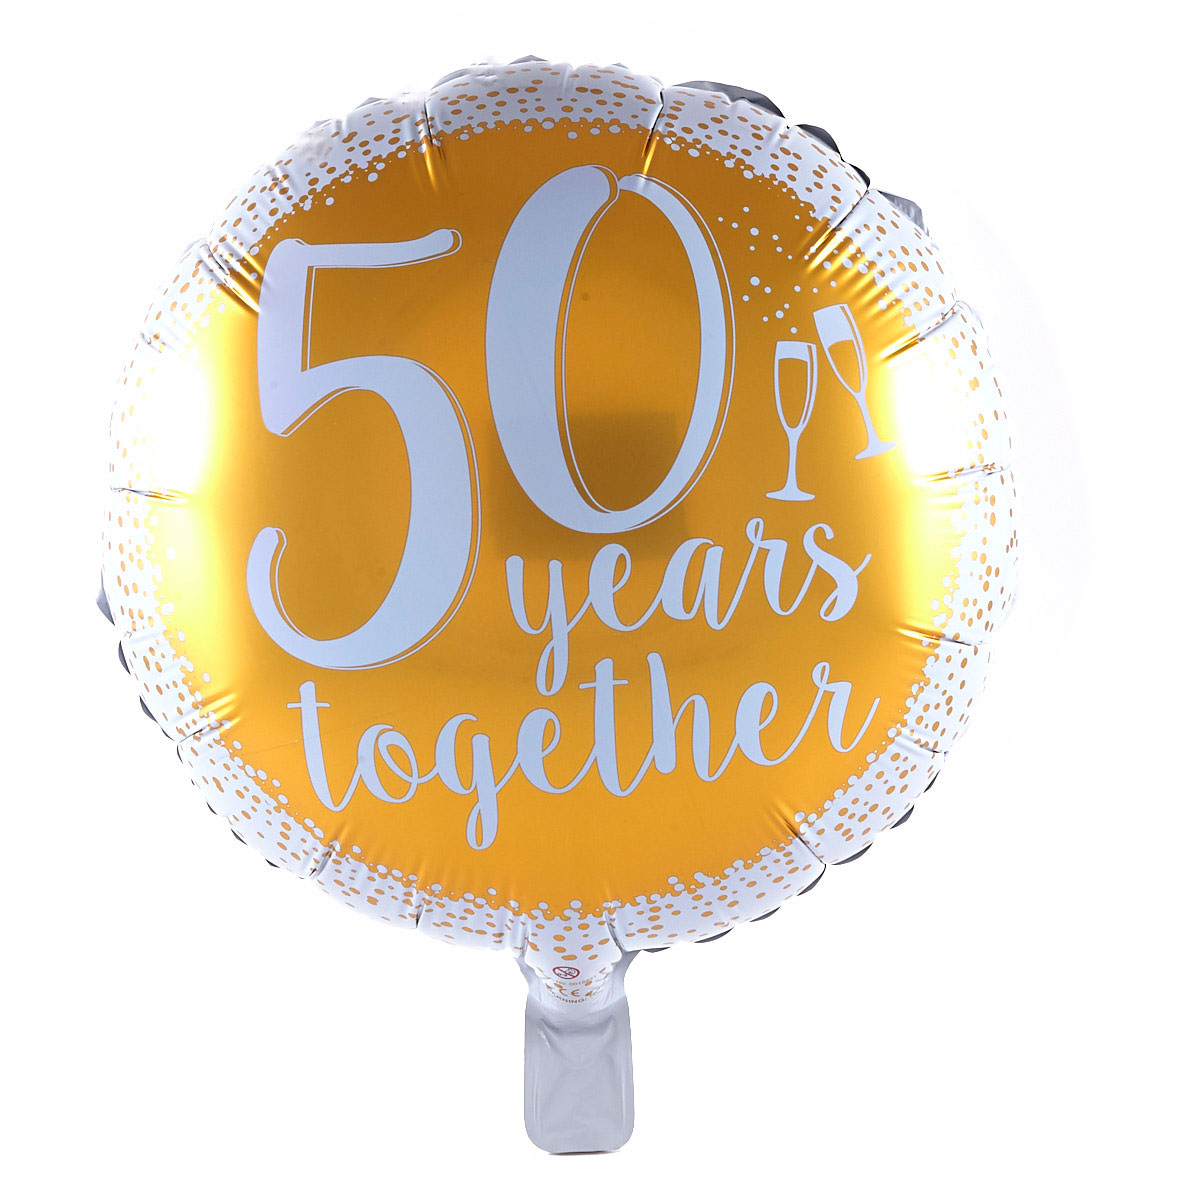 50 Years Together Gold Anniversary Foil Helium Balloon